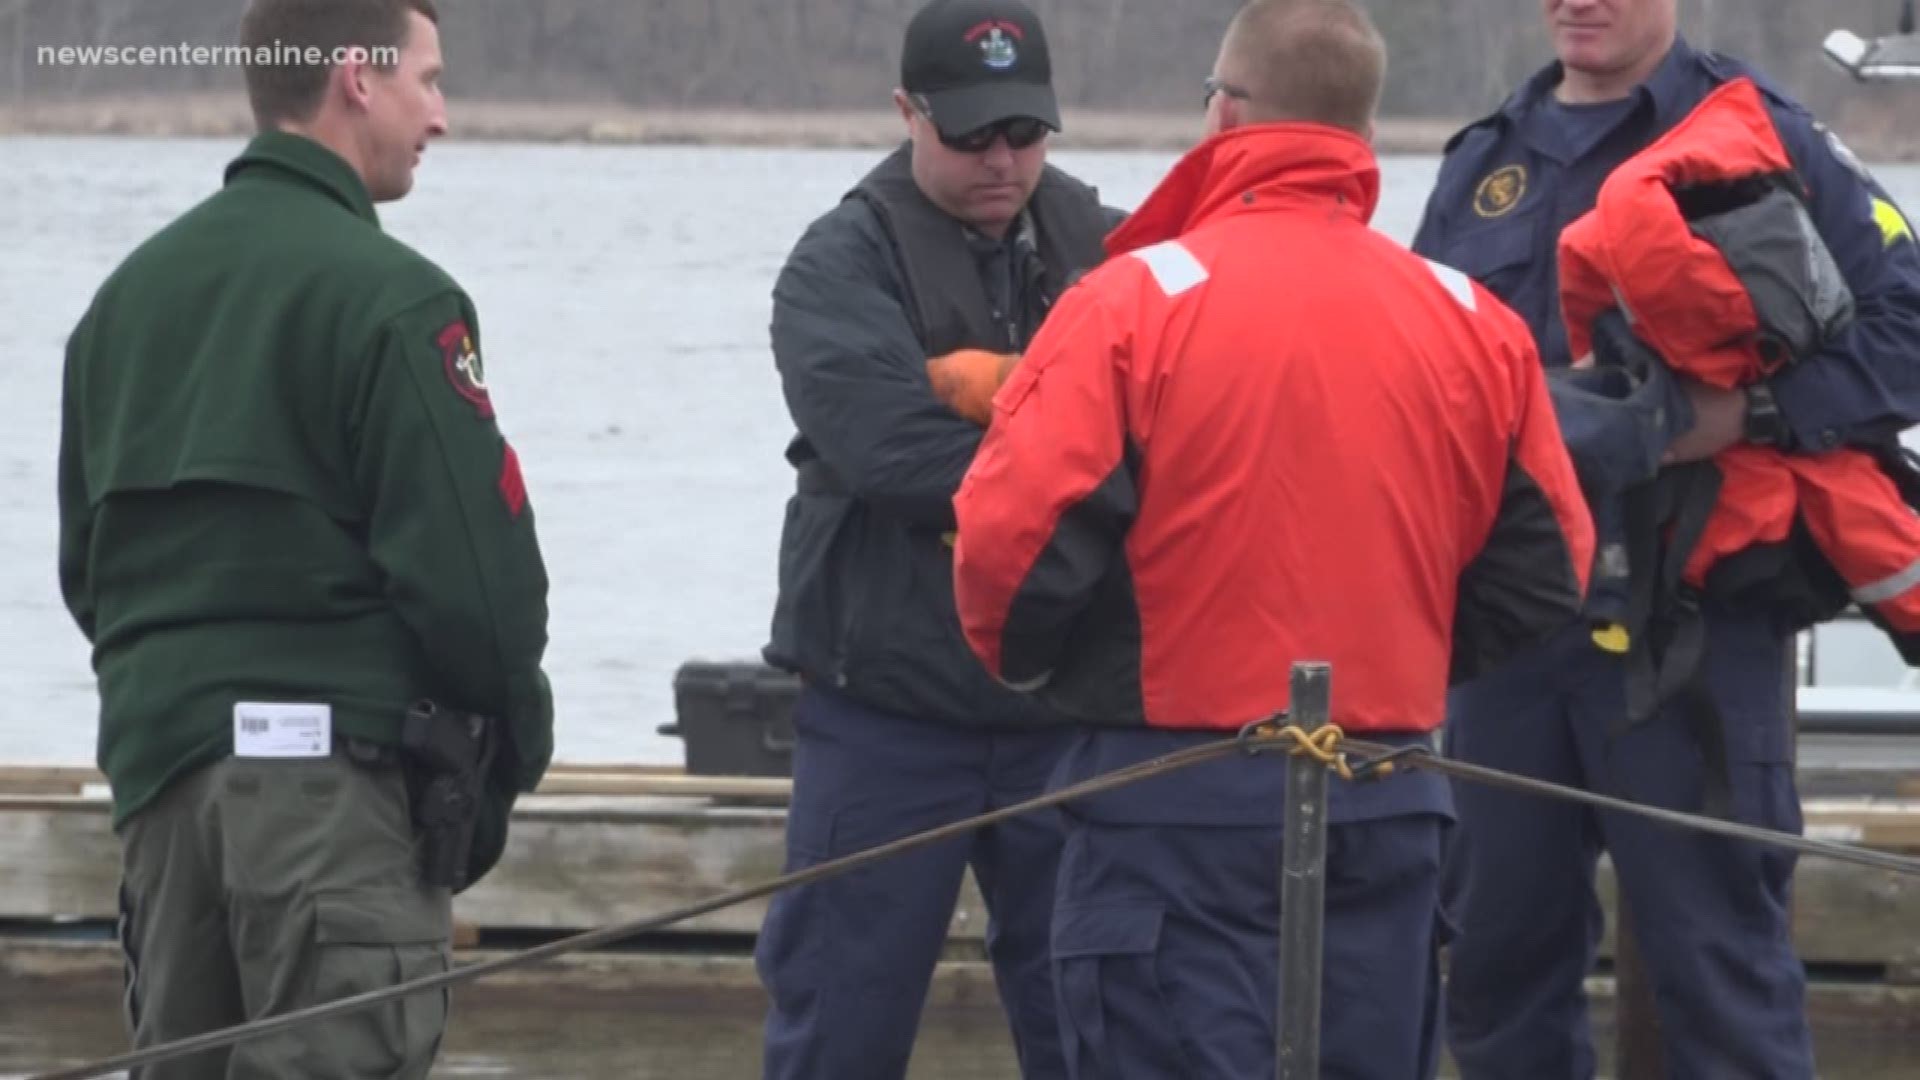 A man from Wisconsin is missing after falling into the Kennebec River Thursday night.